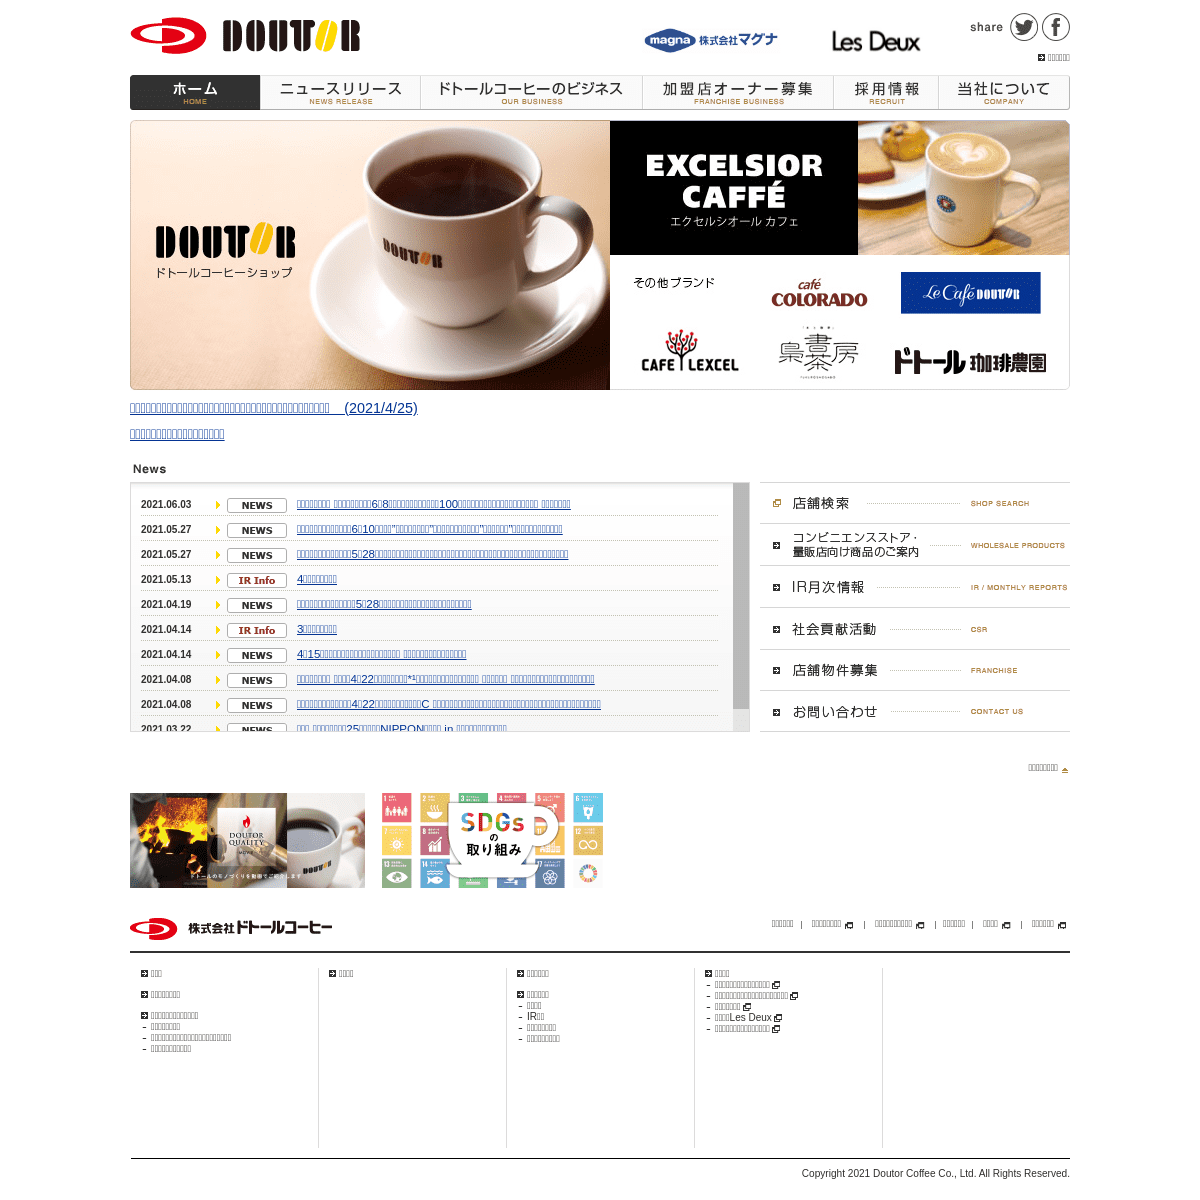 A complete backup of https://doutor.co.jp